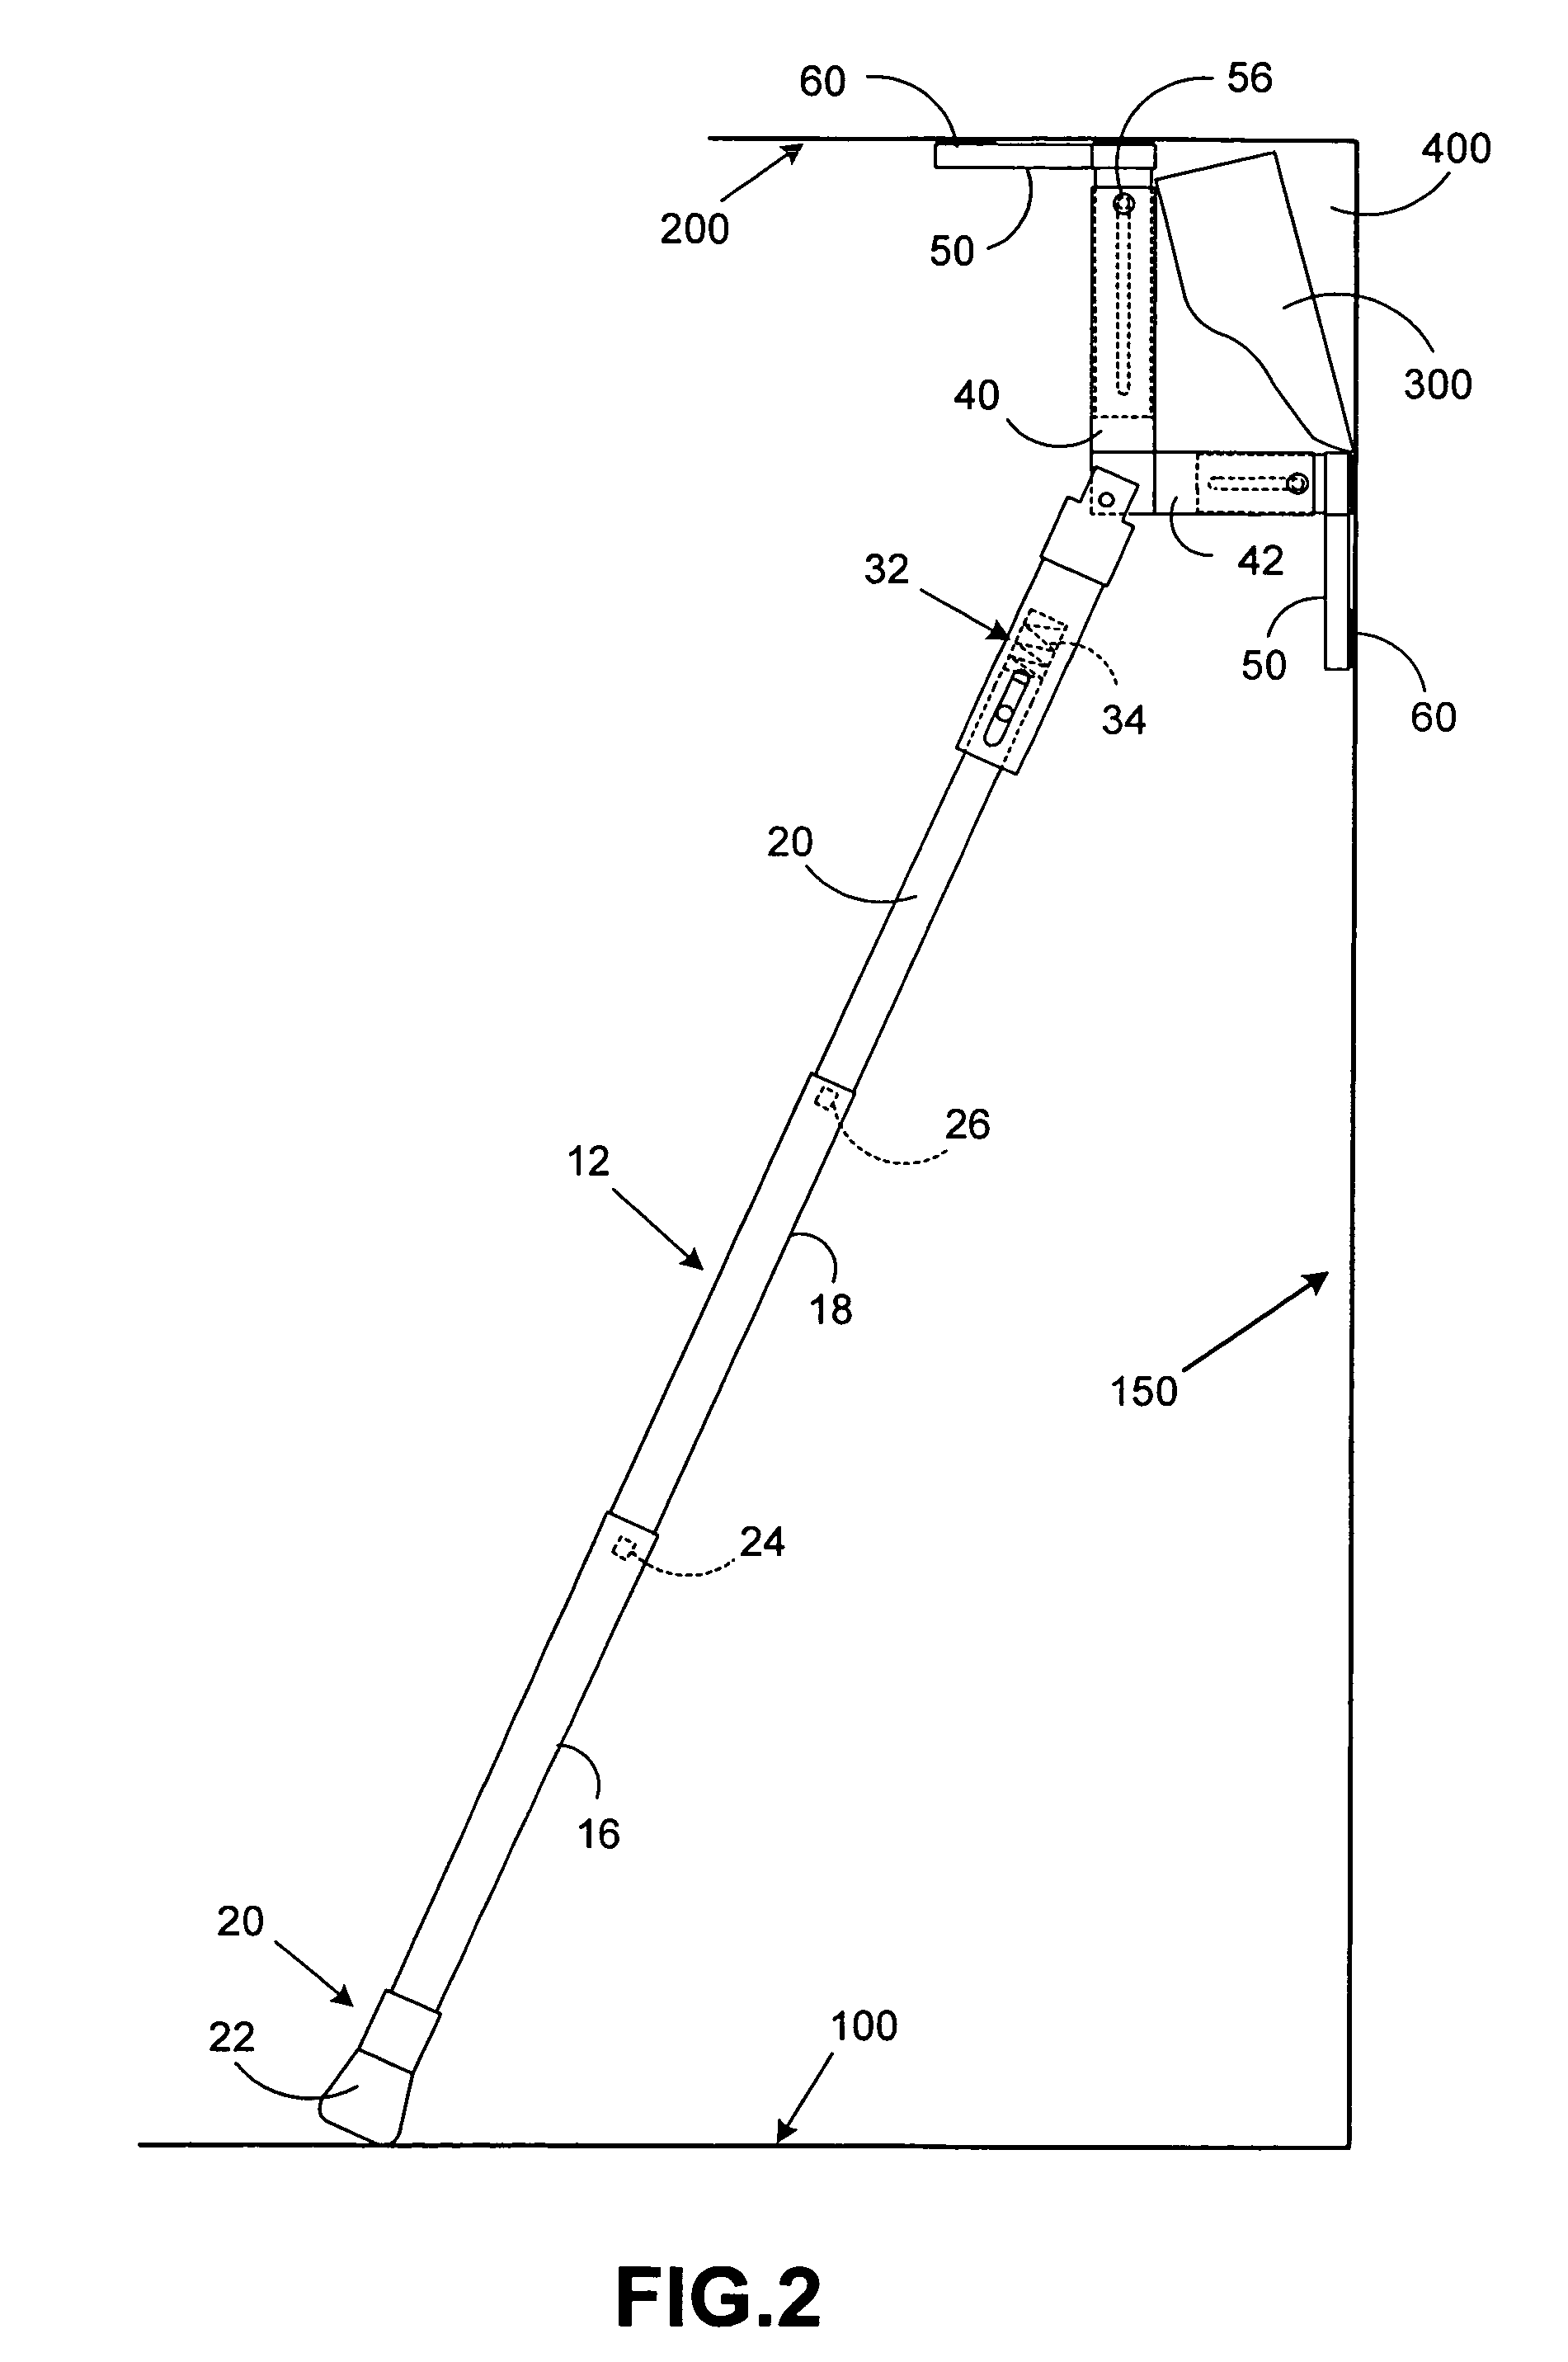 Apparatus for supporting molding pieces